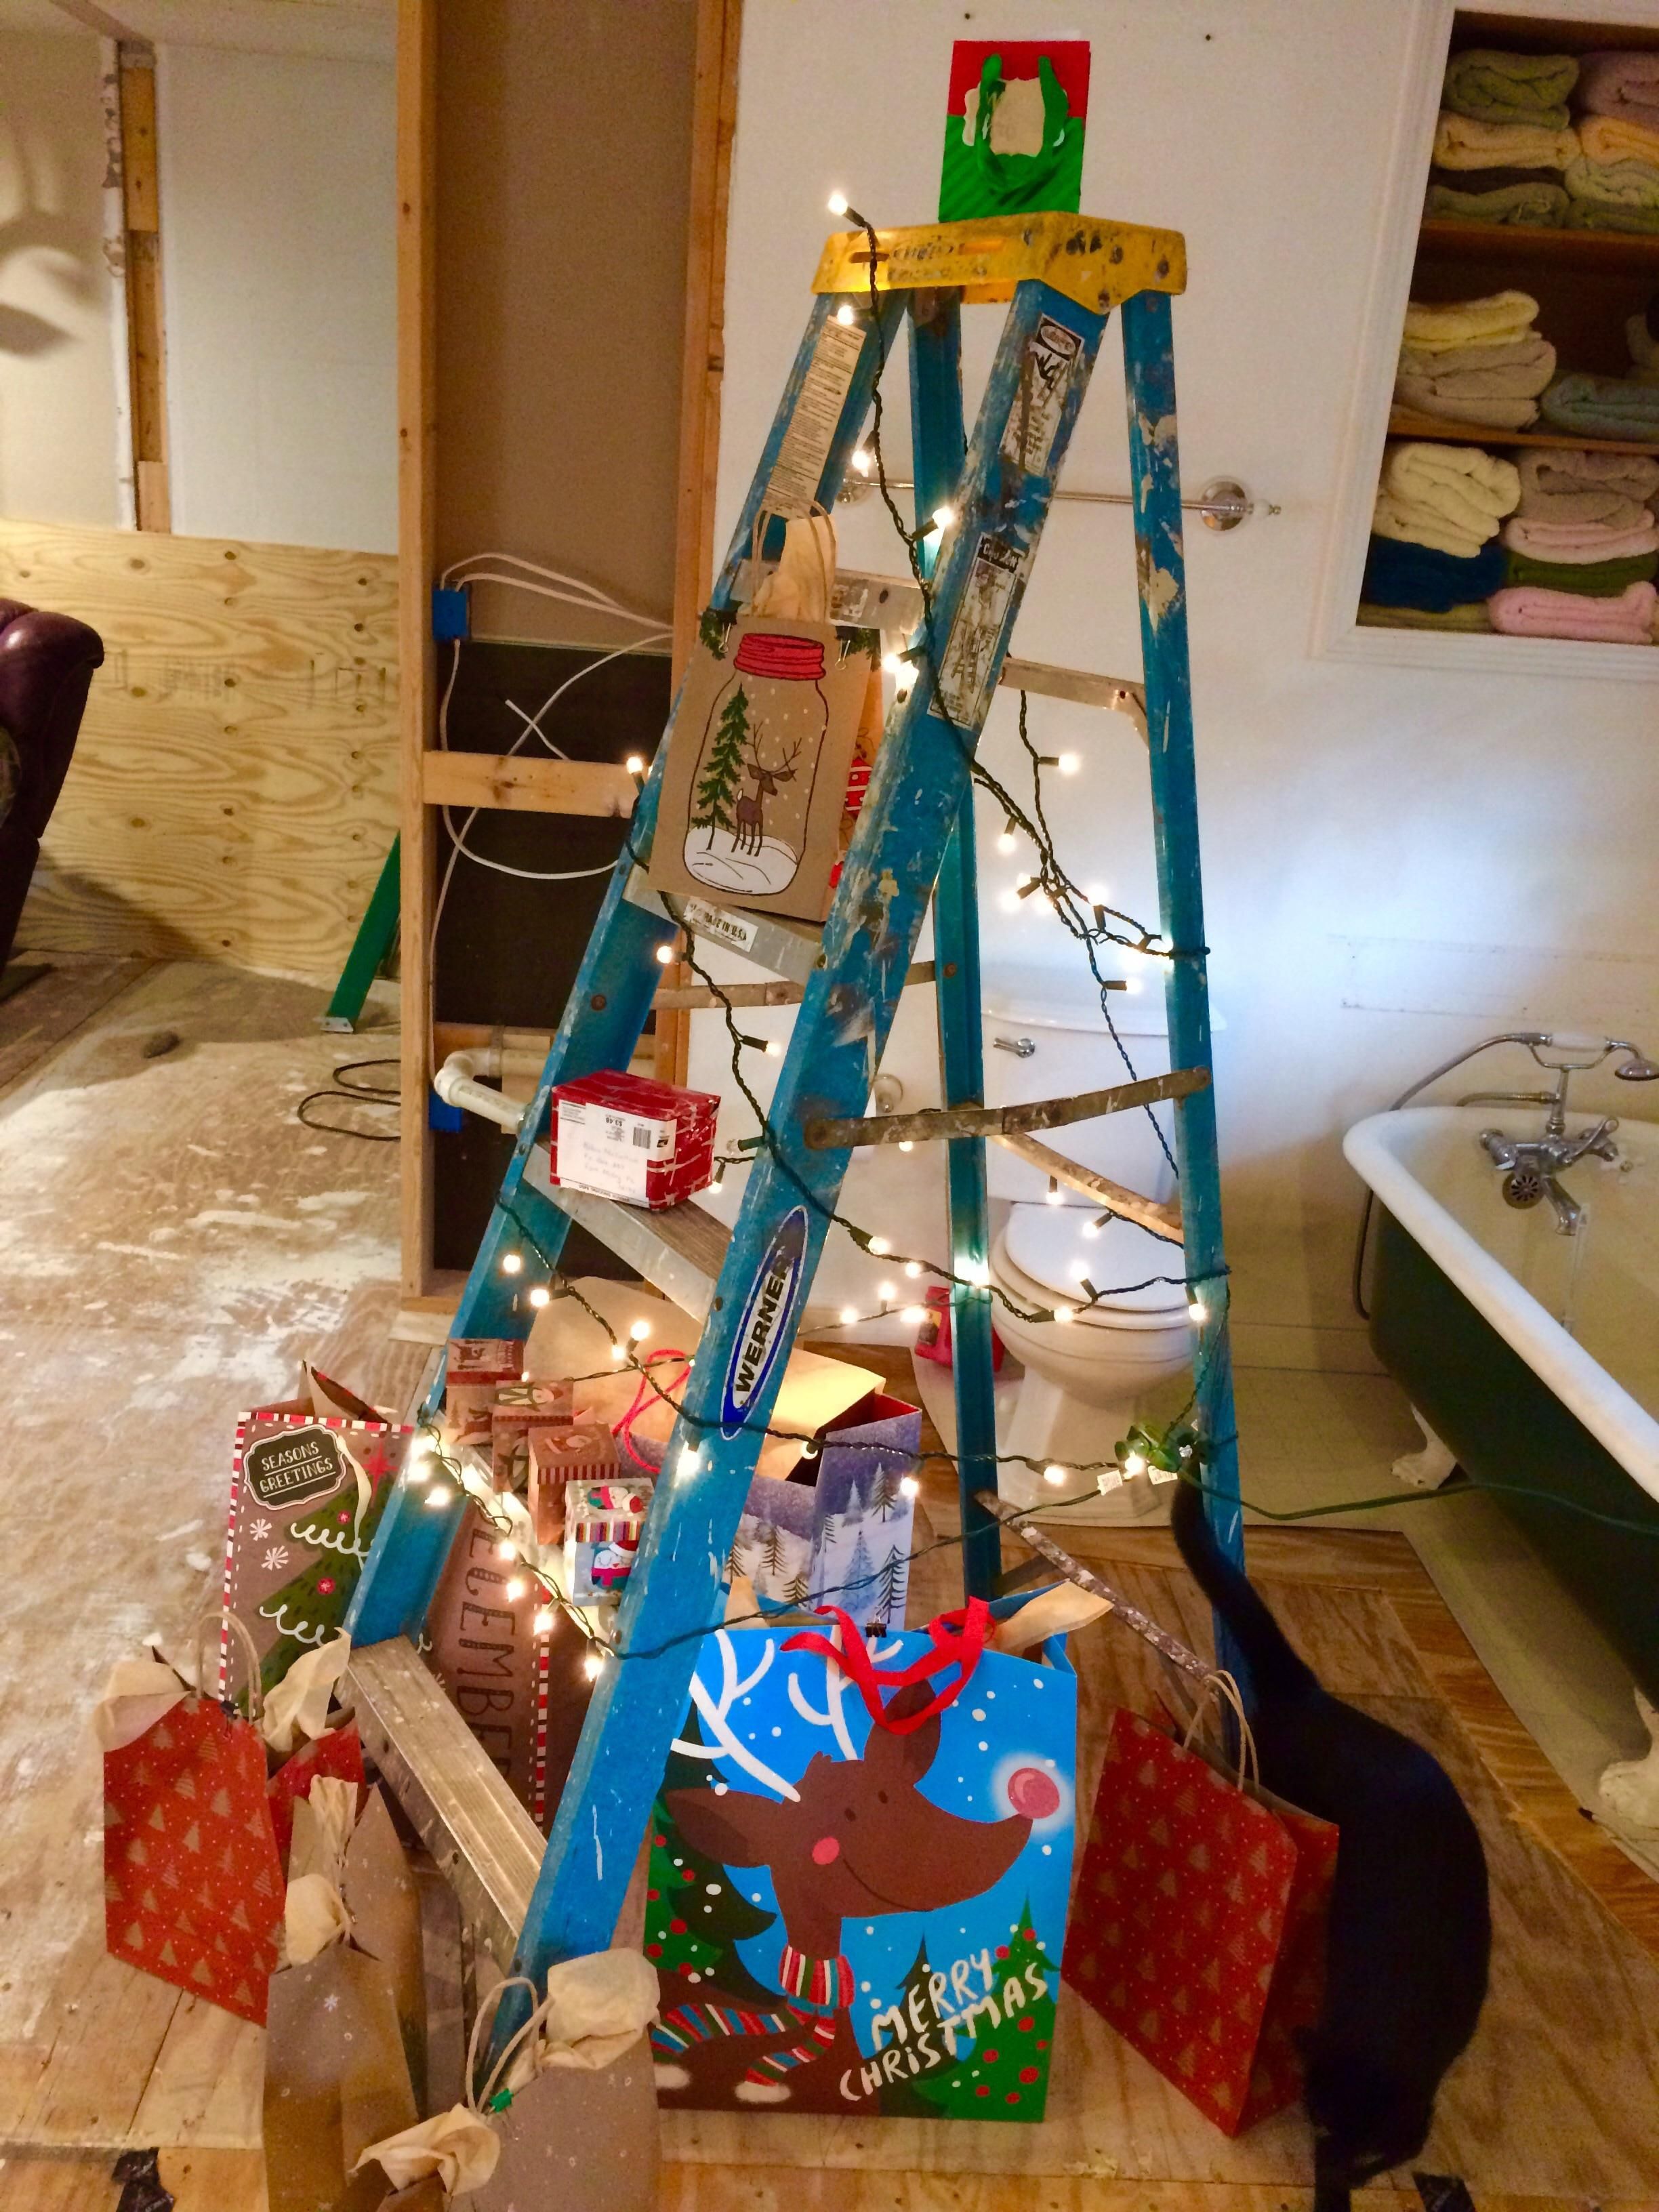 My parents are remodeling their home over the holiday break. This is their makeshift Christmas tree.